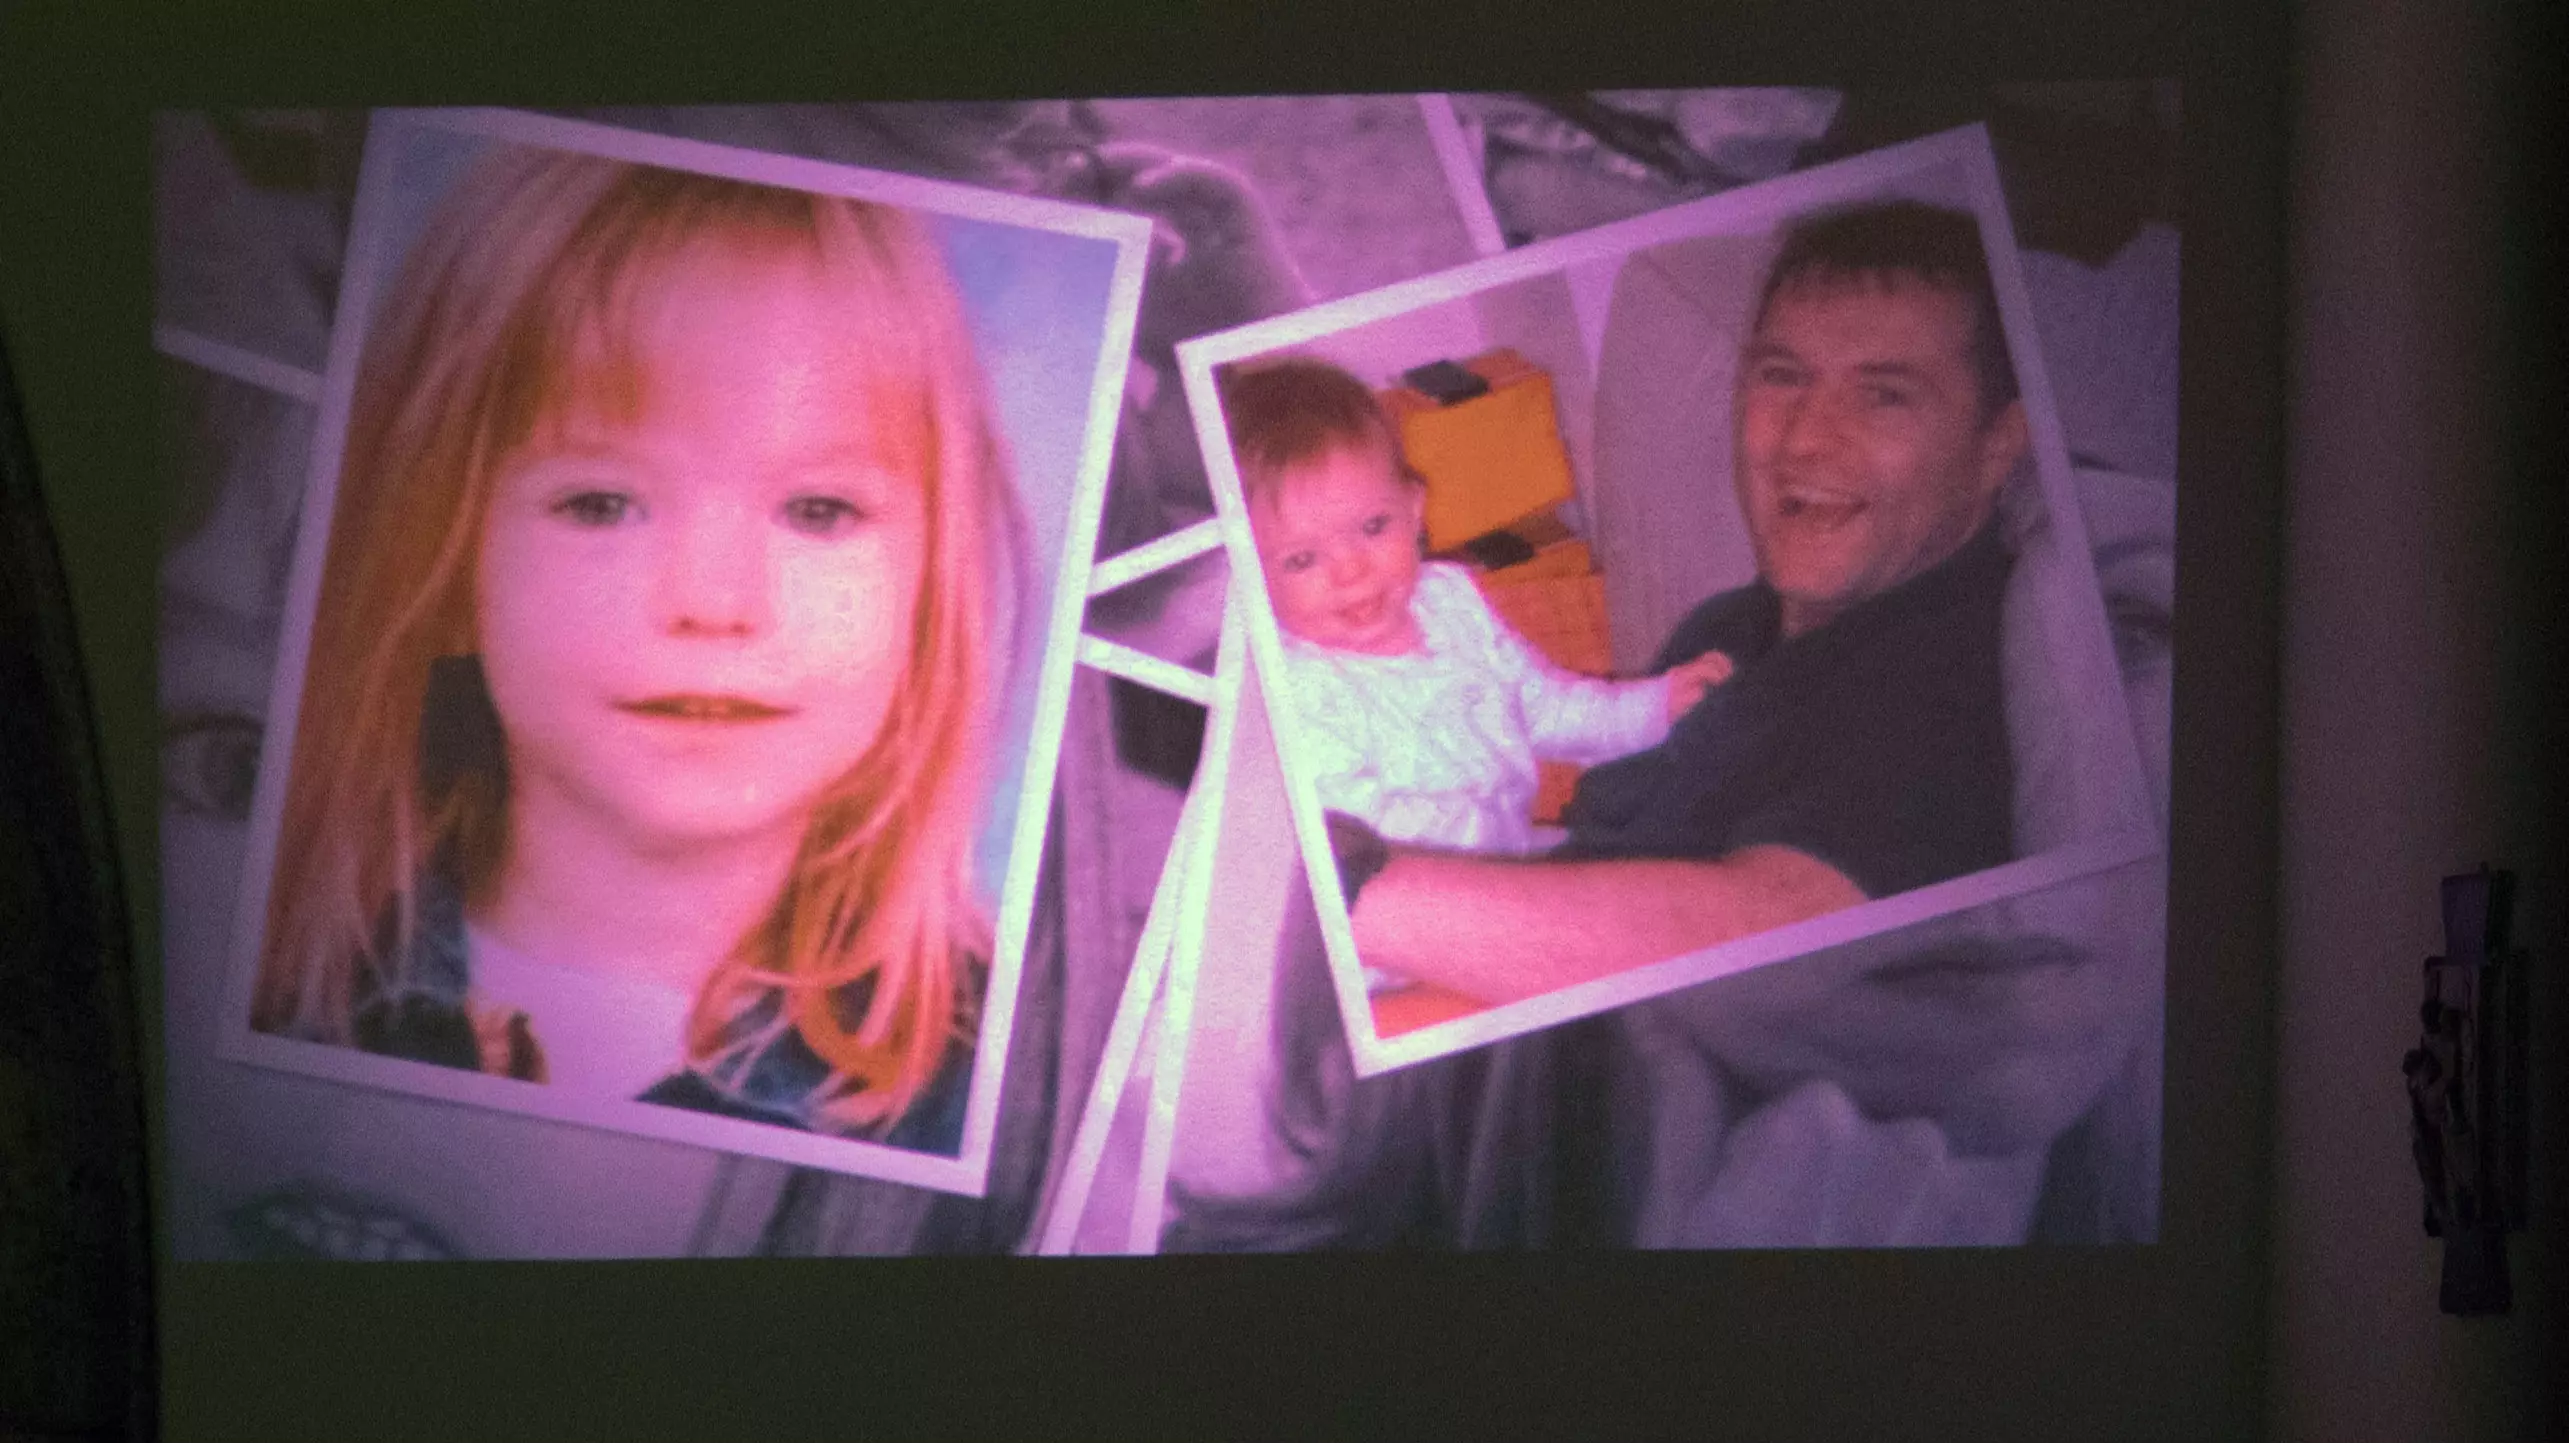 Viewers Left Disturbed By This Scene In New Madeleine McCann Documentary